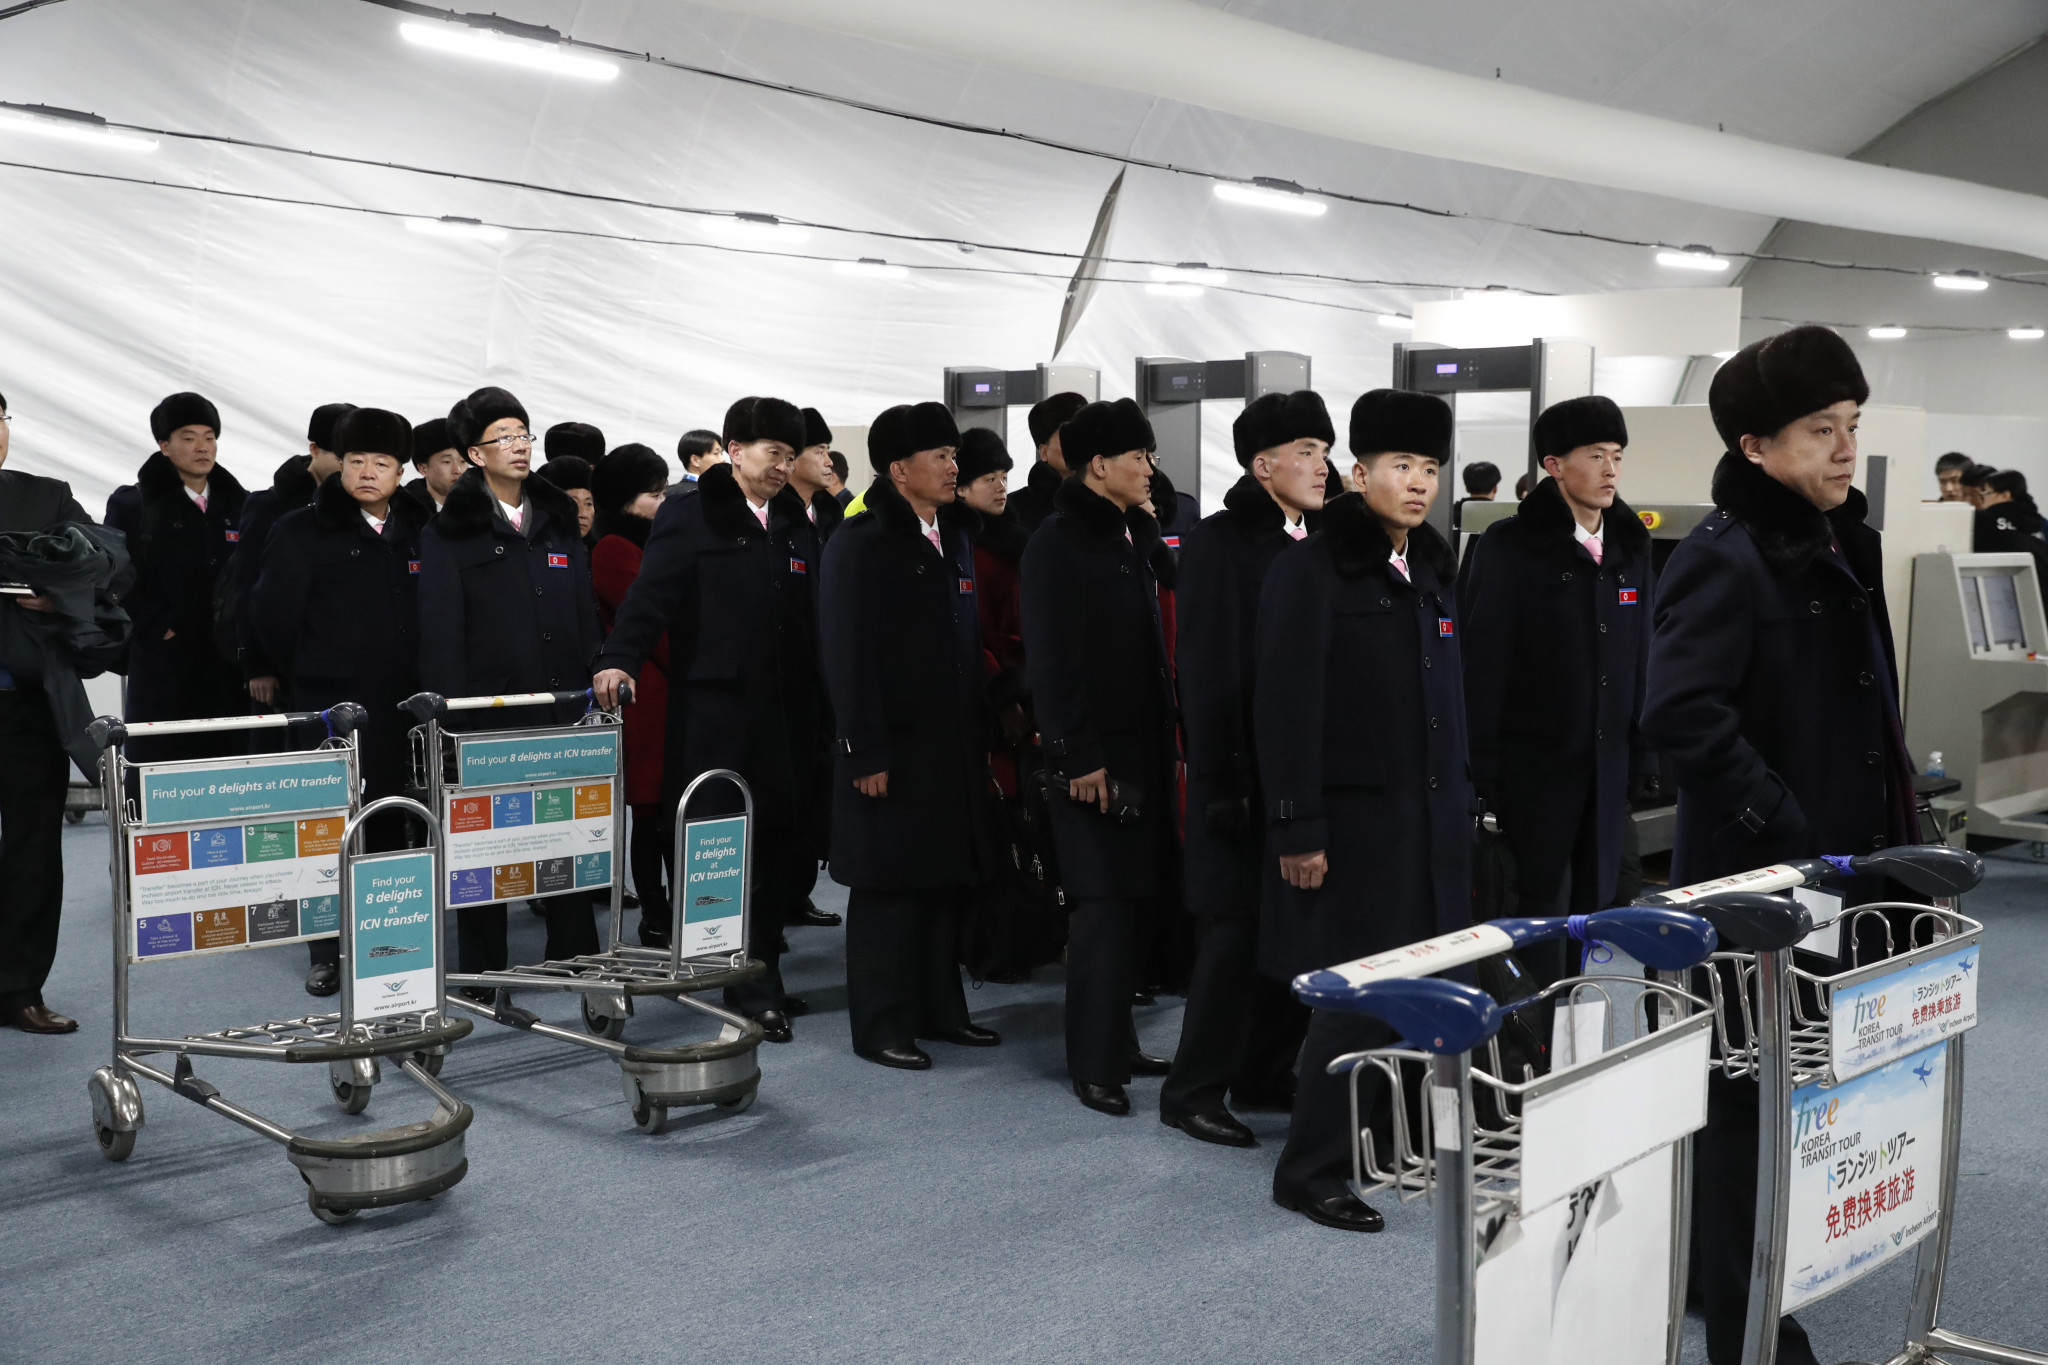 The North Korean delegation has arrived in the South for Pyeongchang 2018 ©Getty Images 